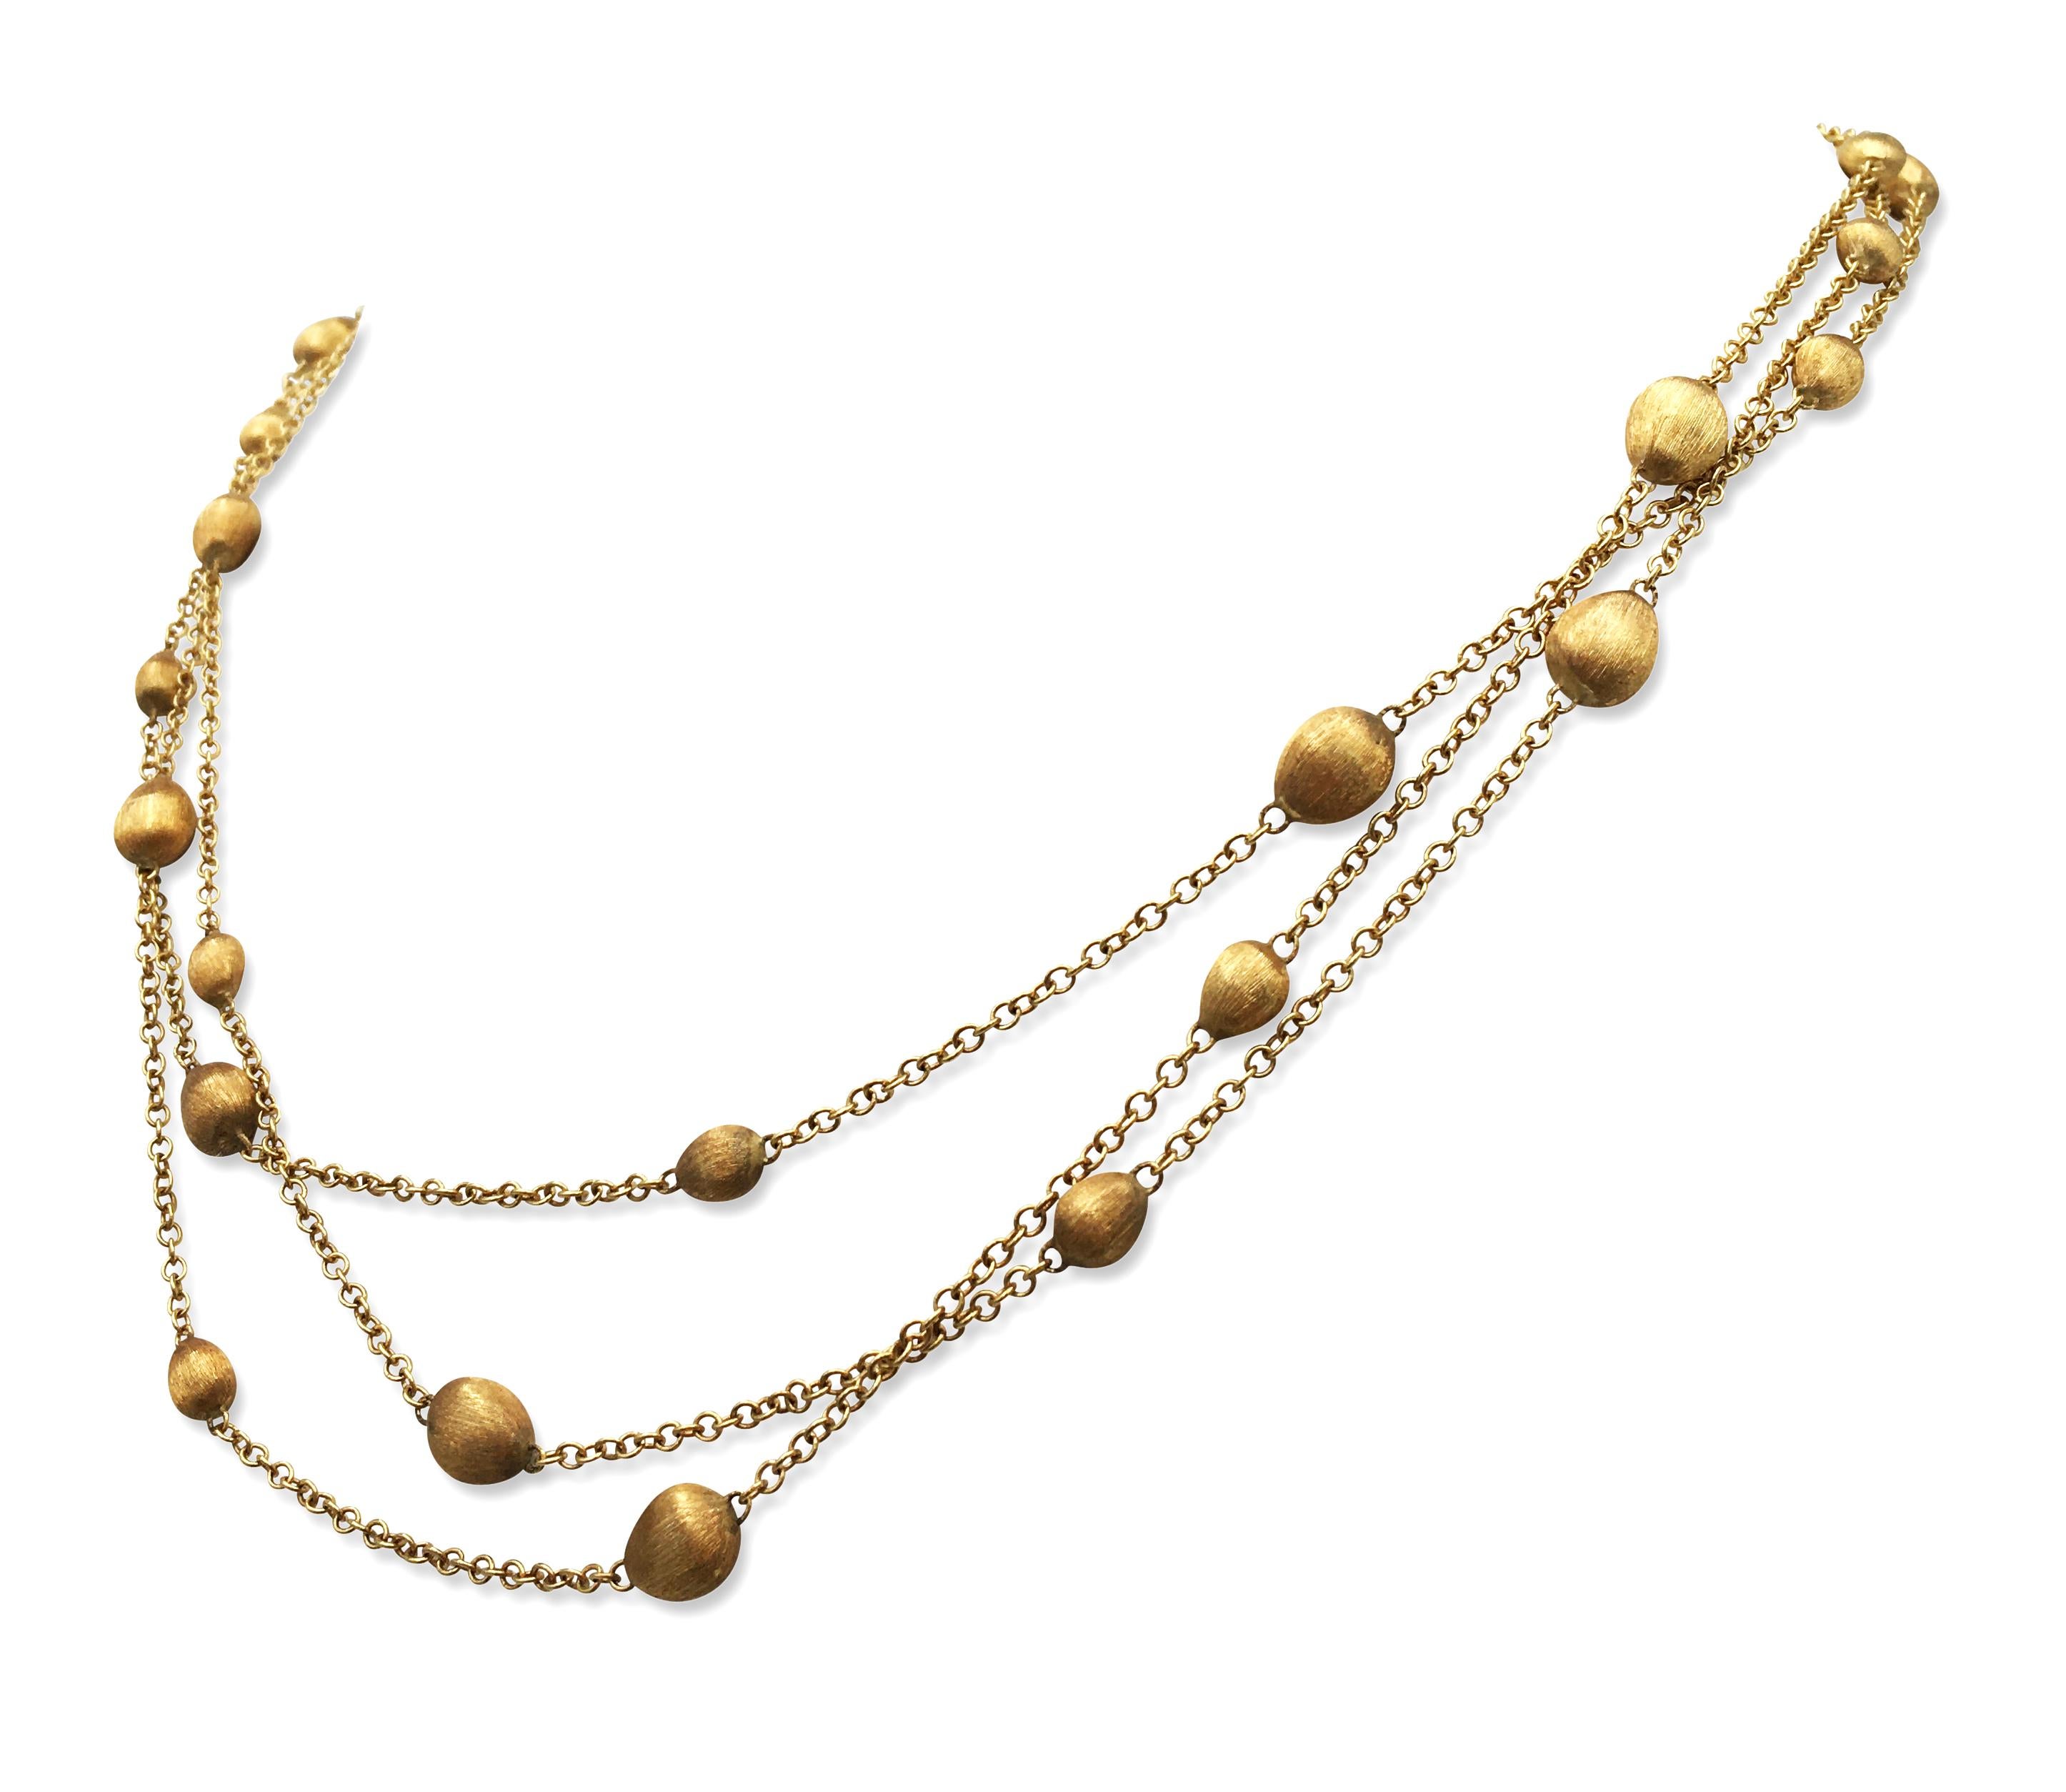 A multi-strand gold necklace featuring hand engraved gold satin finished pebble stations, made in Itlay by Marco Bicego. The necklace is completed with satin finish lobster clasp. Marked Marco Bicego, '750', Made in Italy. The necklace does not come